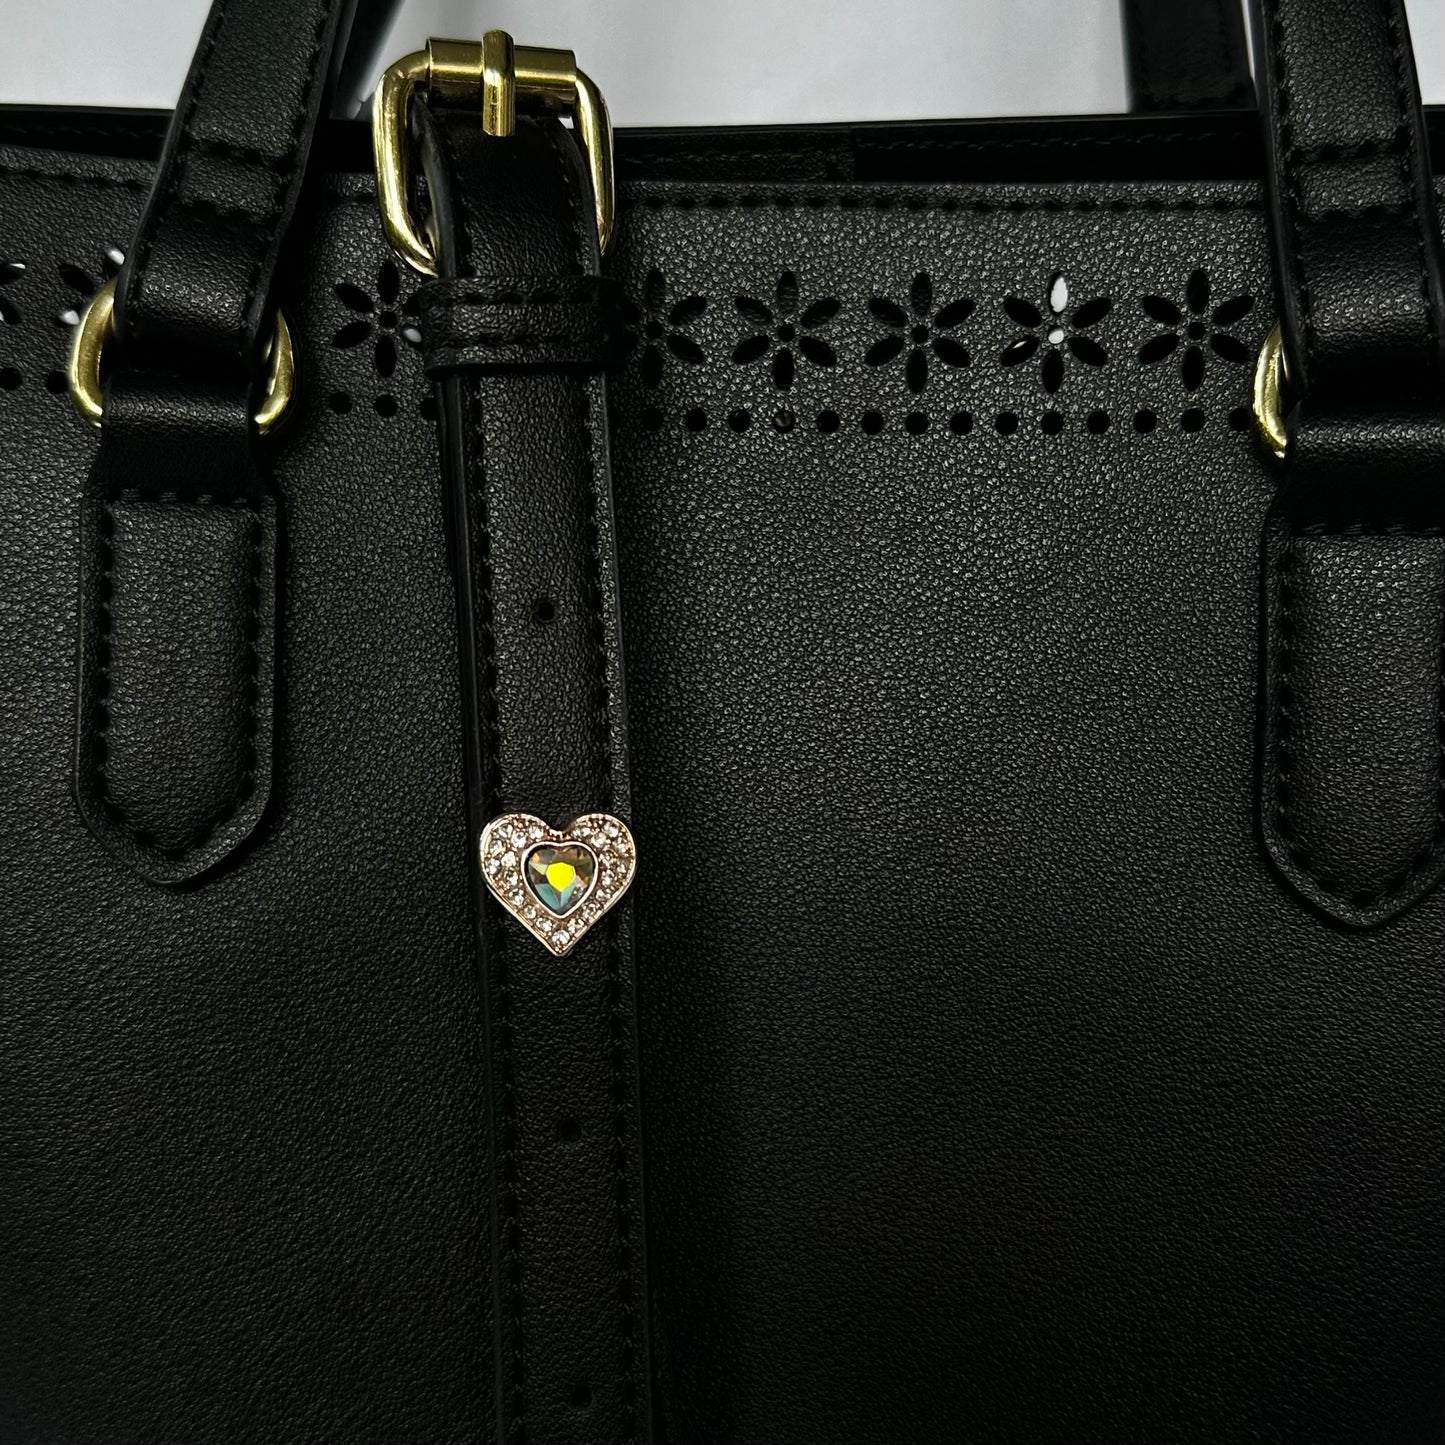 Gold Heart Bag and Belt Jewelry Charm